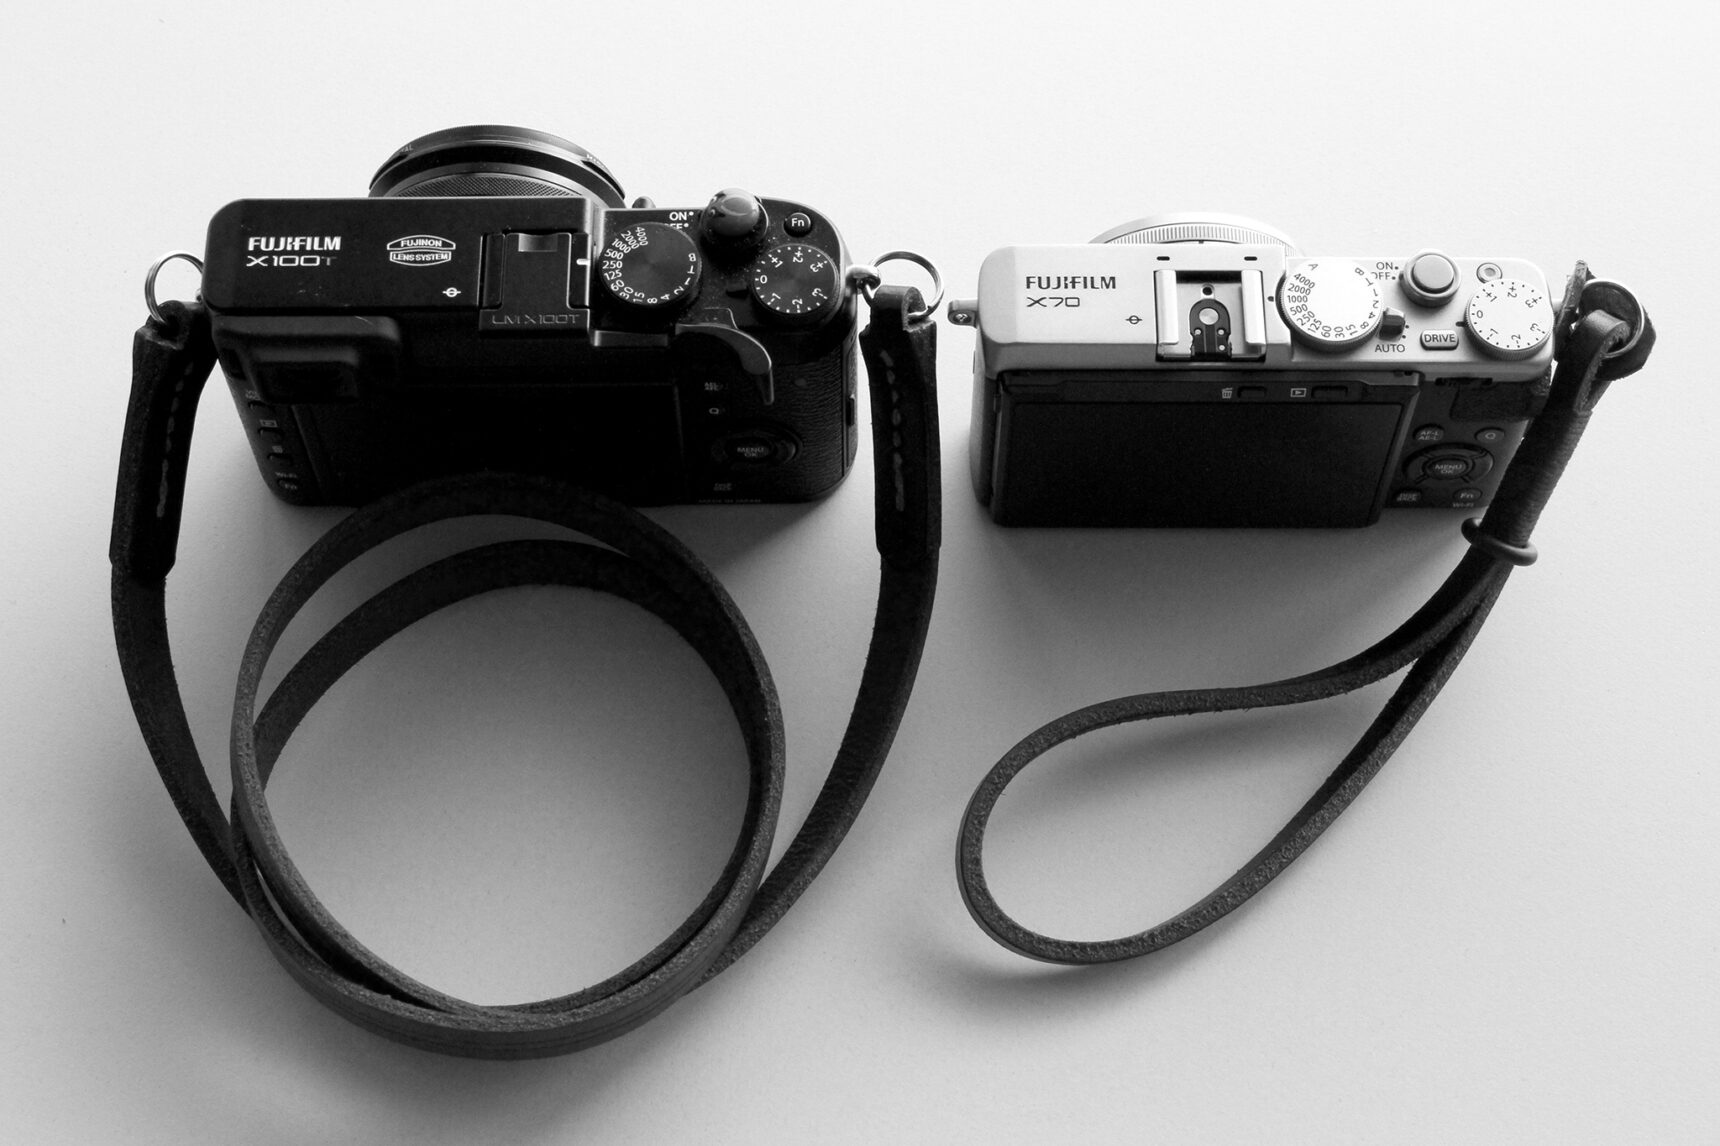 Fuji X70 Street Review - Compared To X100T